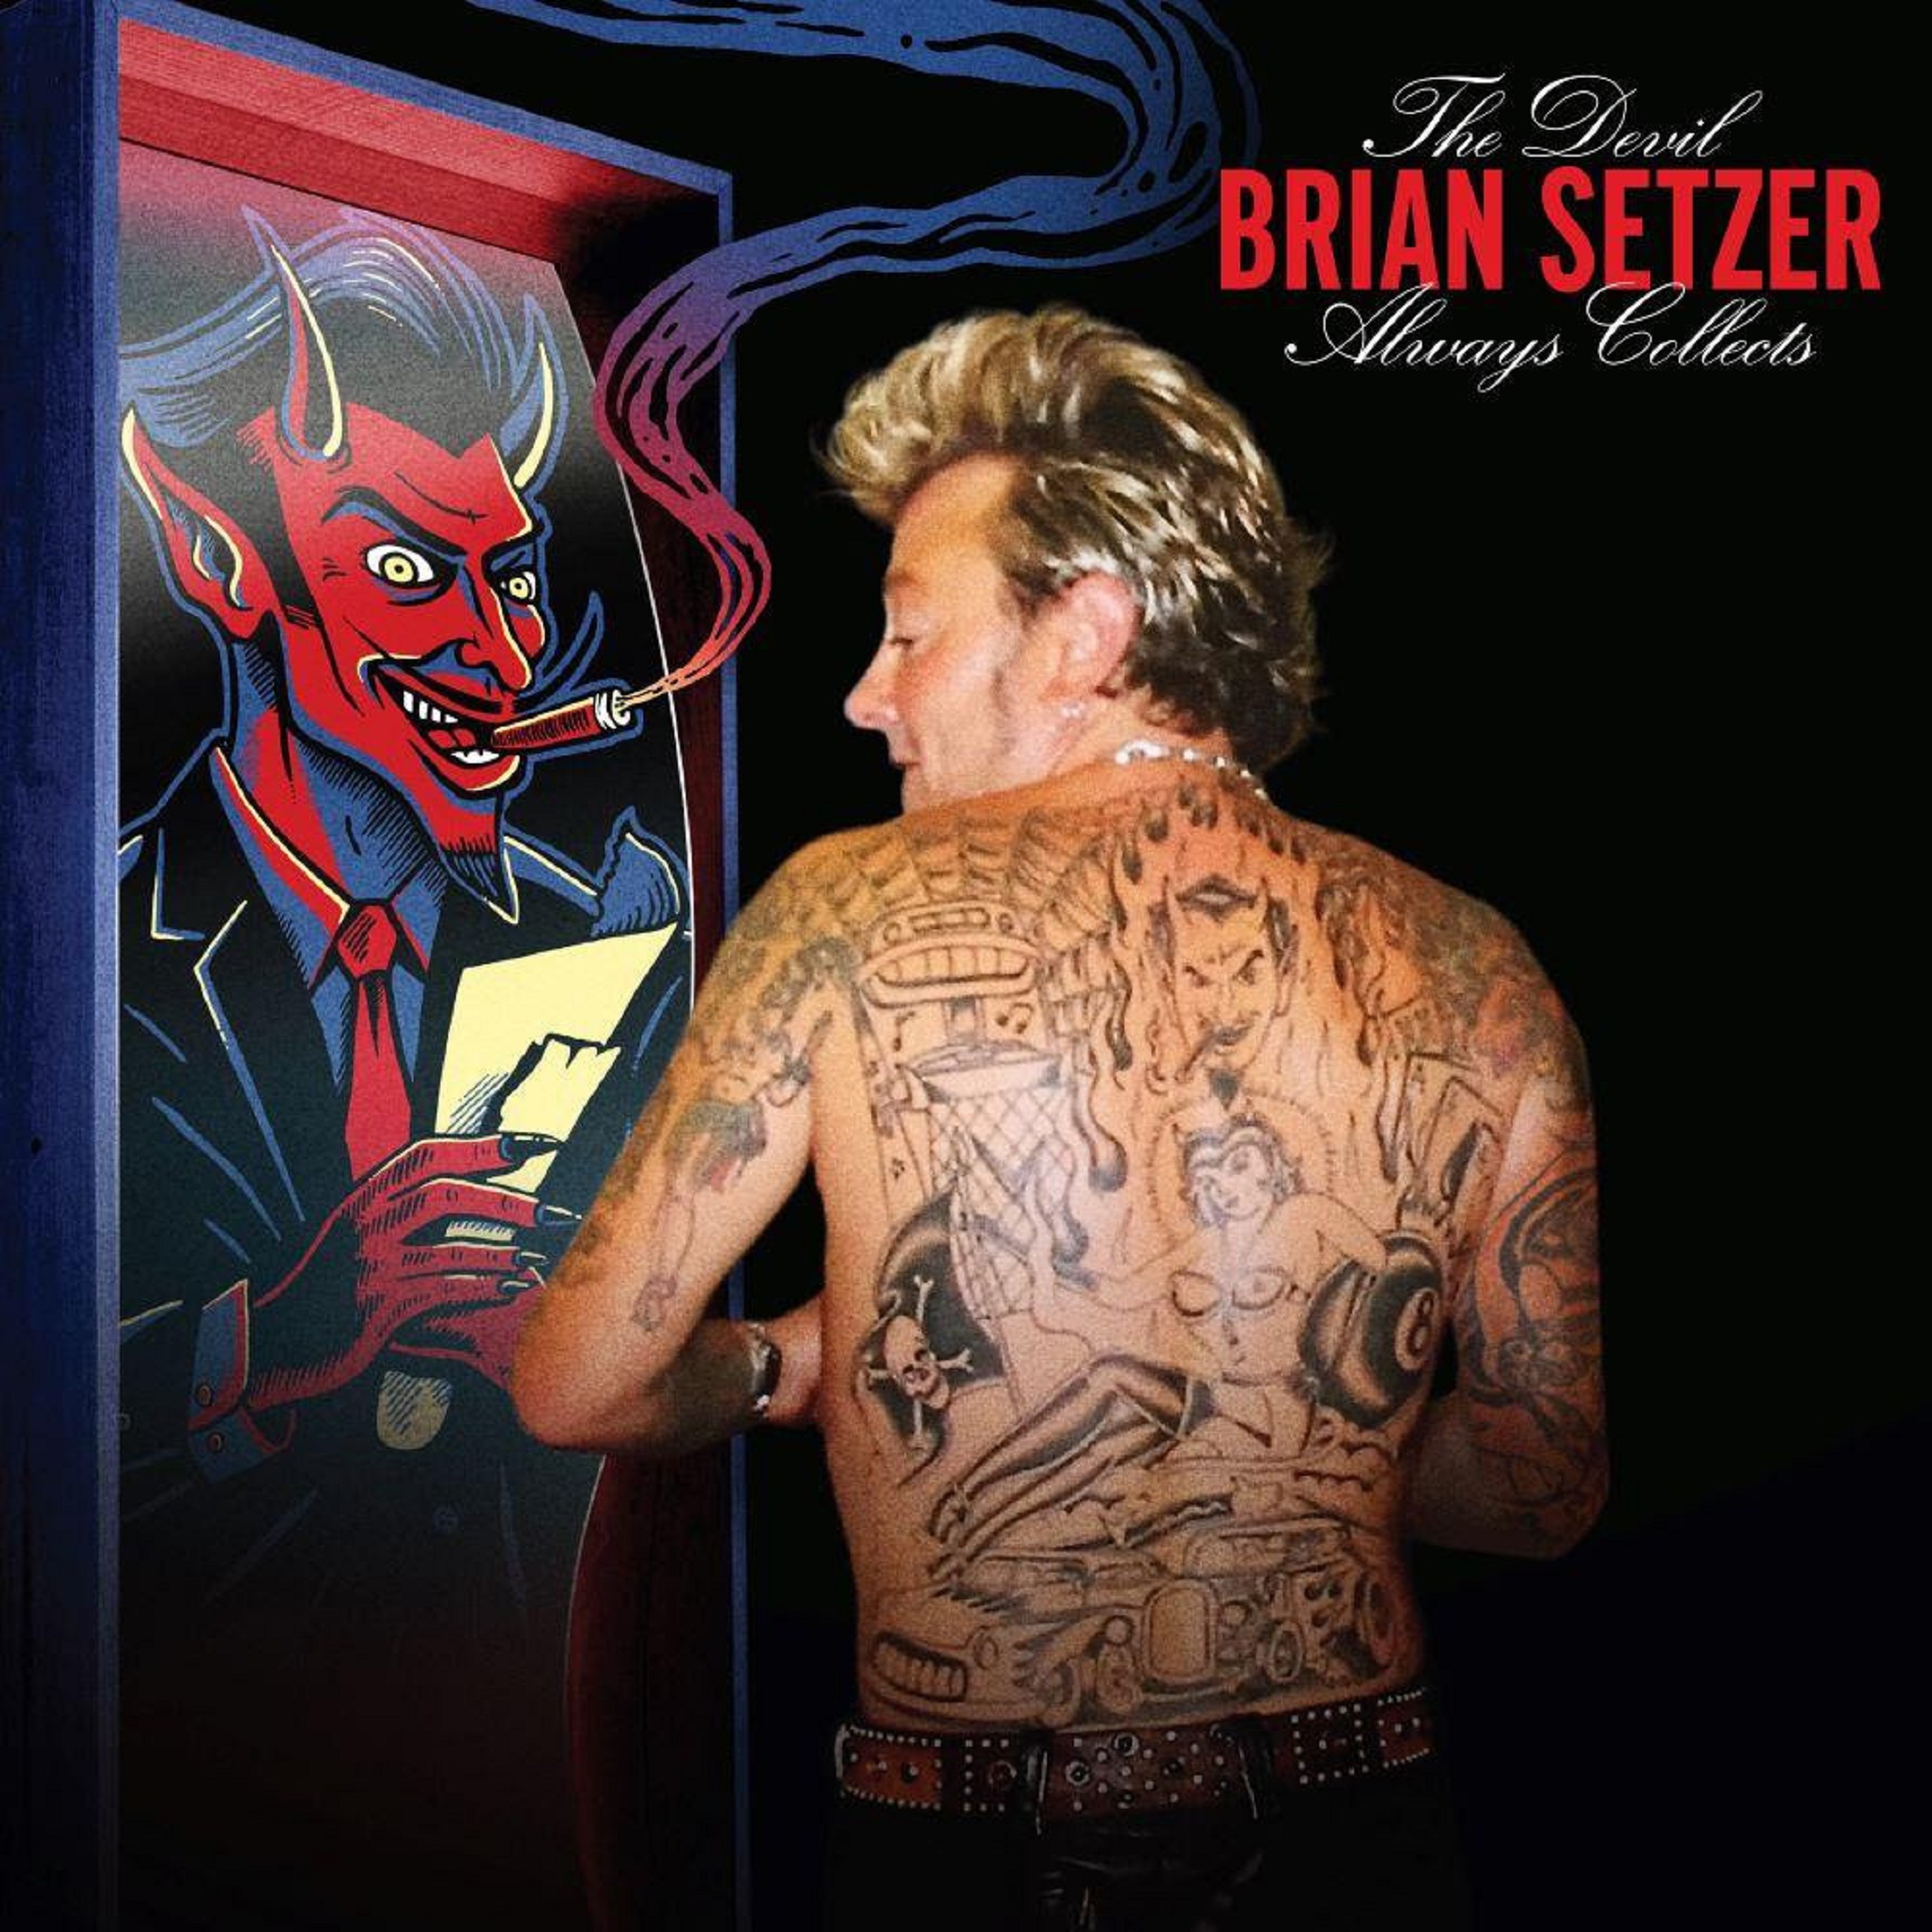 BRIAN SETZER Rolls Out Video For “Rock Boys Rock,” The Fourth Track From New Solo Album “The Devil Always Collects,” Both Out Today